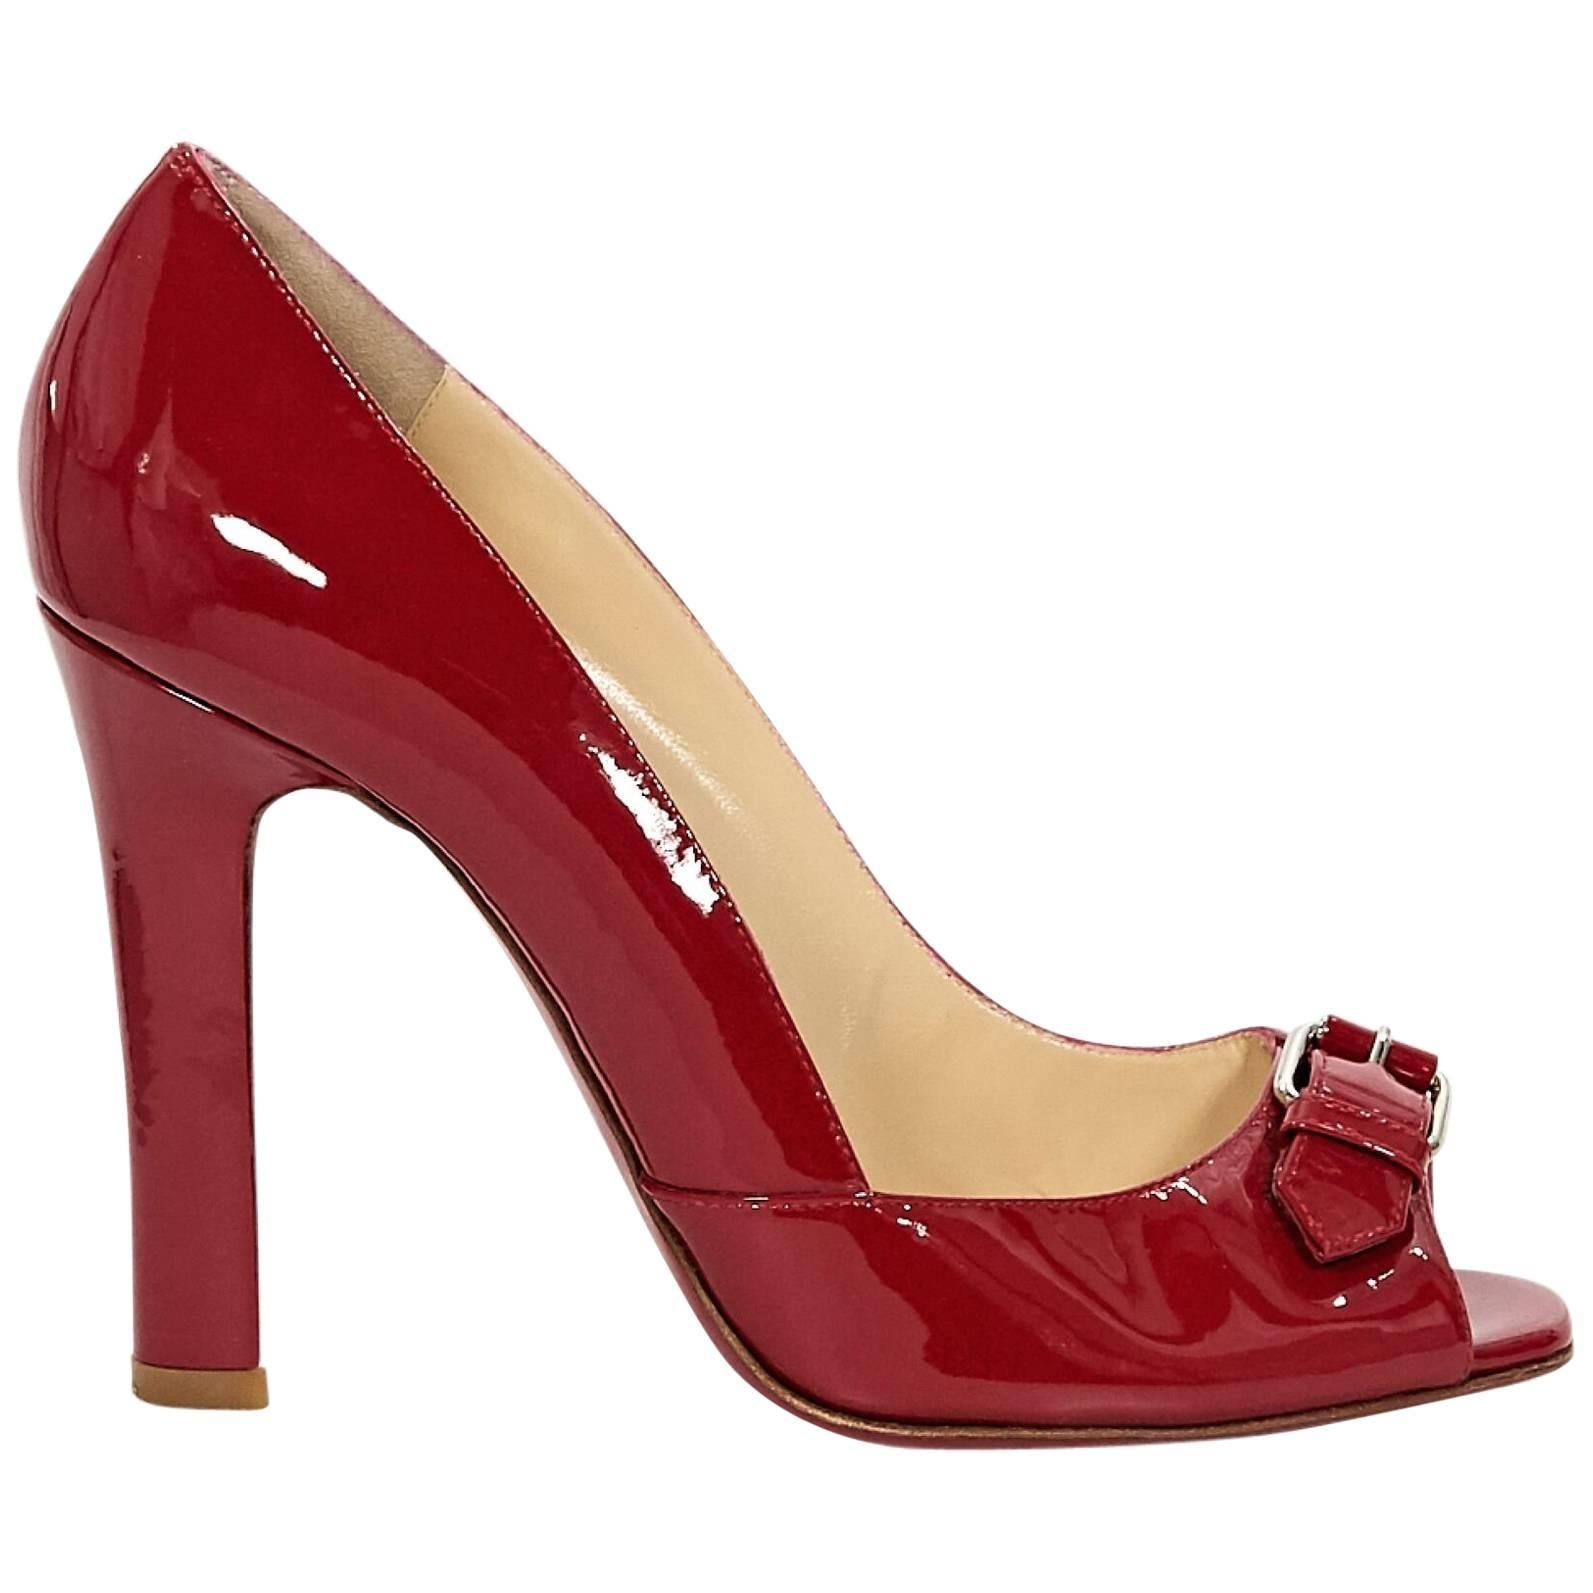 Red Christian Louboutin Patent Leather Pumps